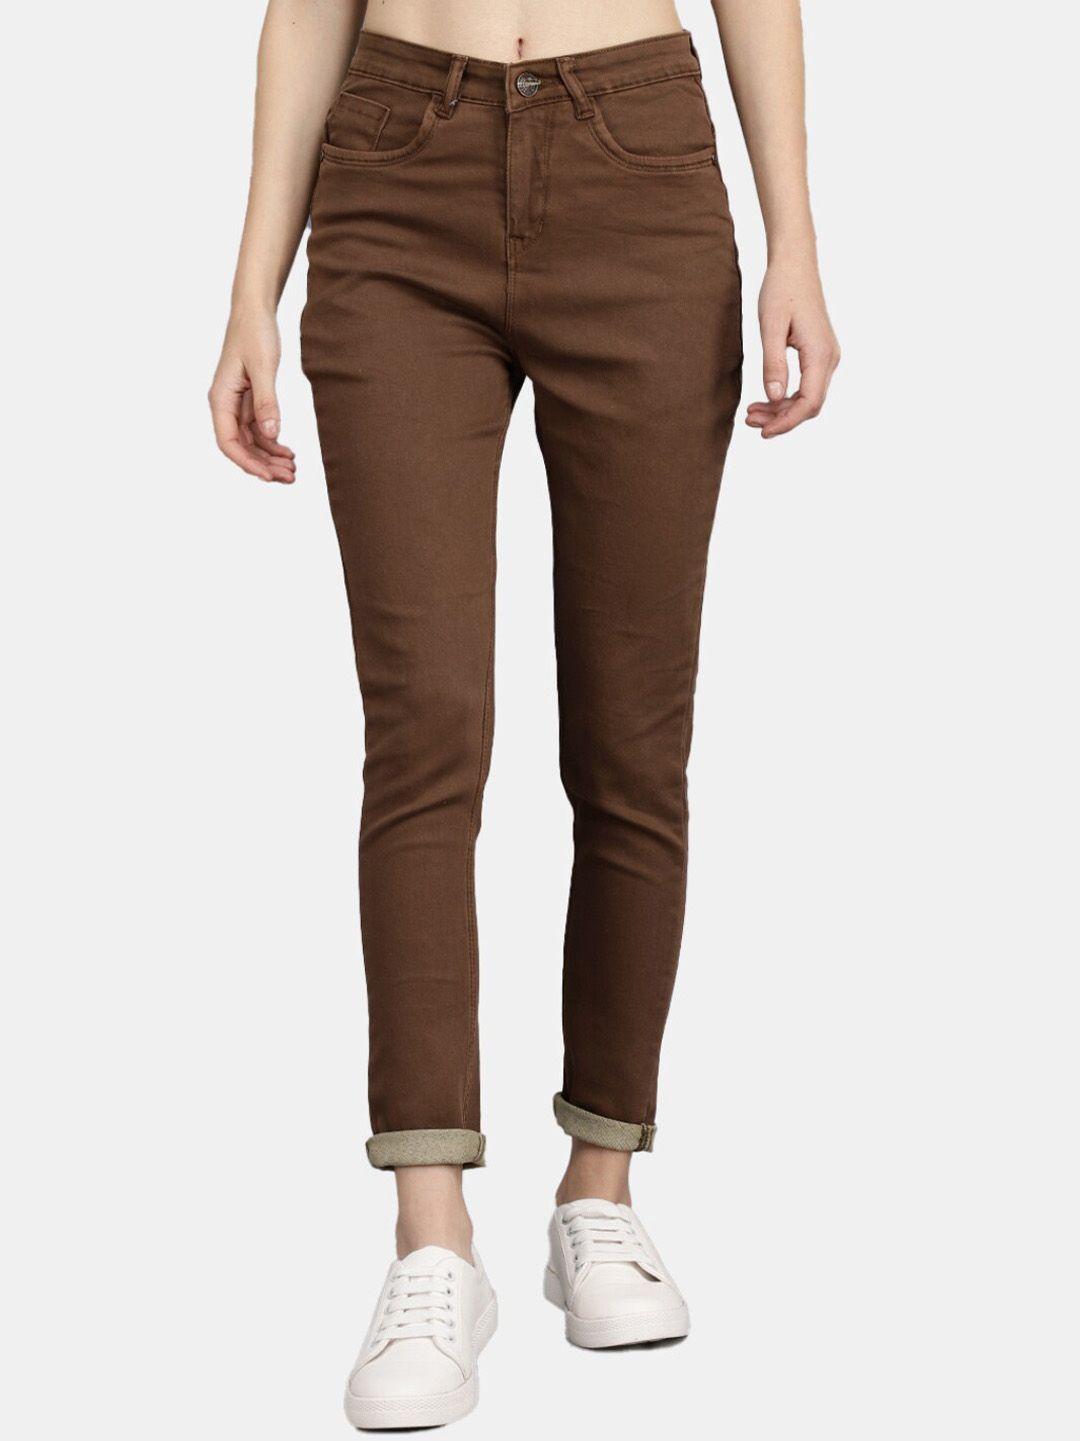 v-mart classic mid rise cotton trousers